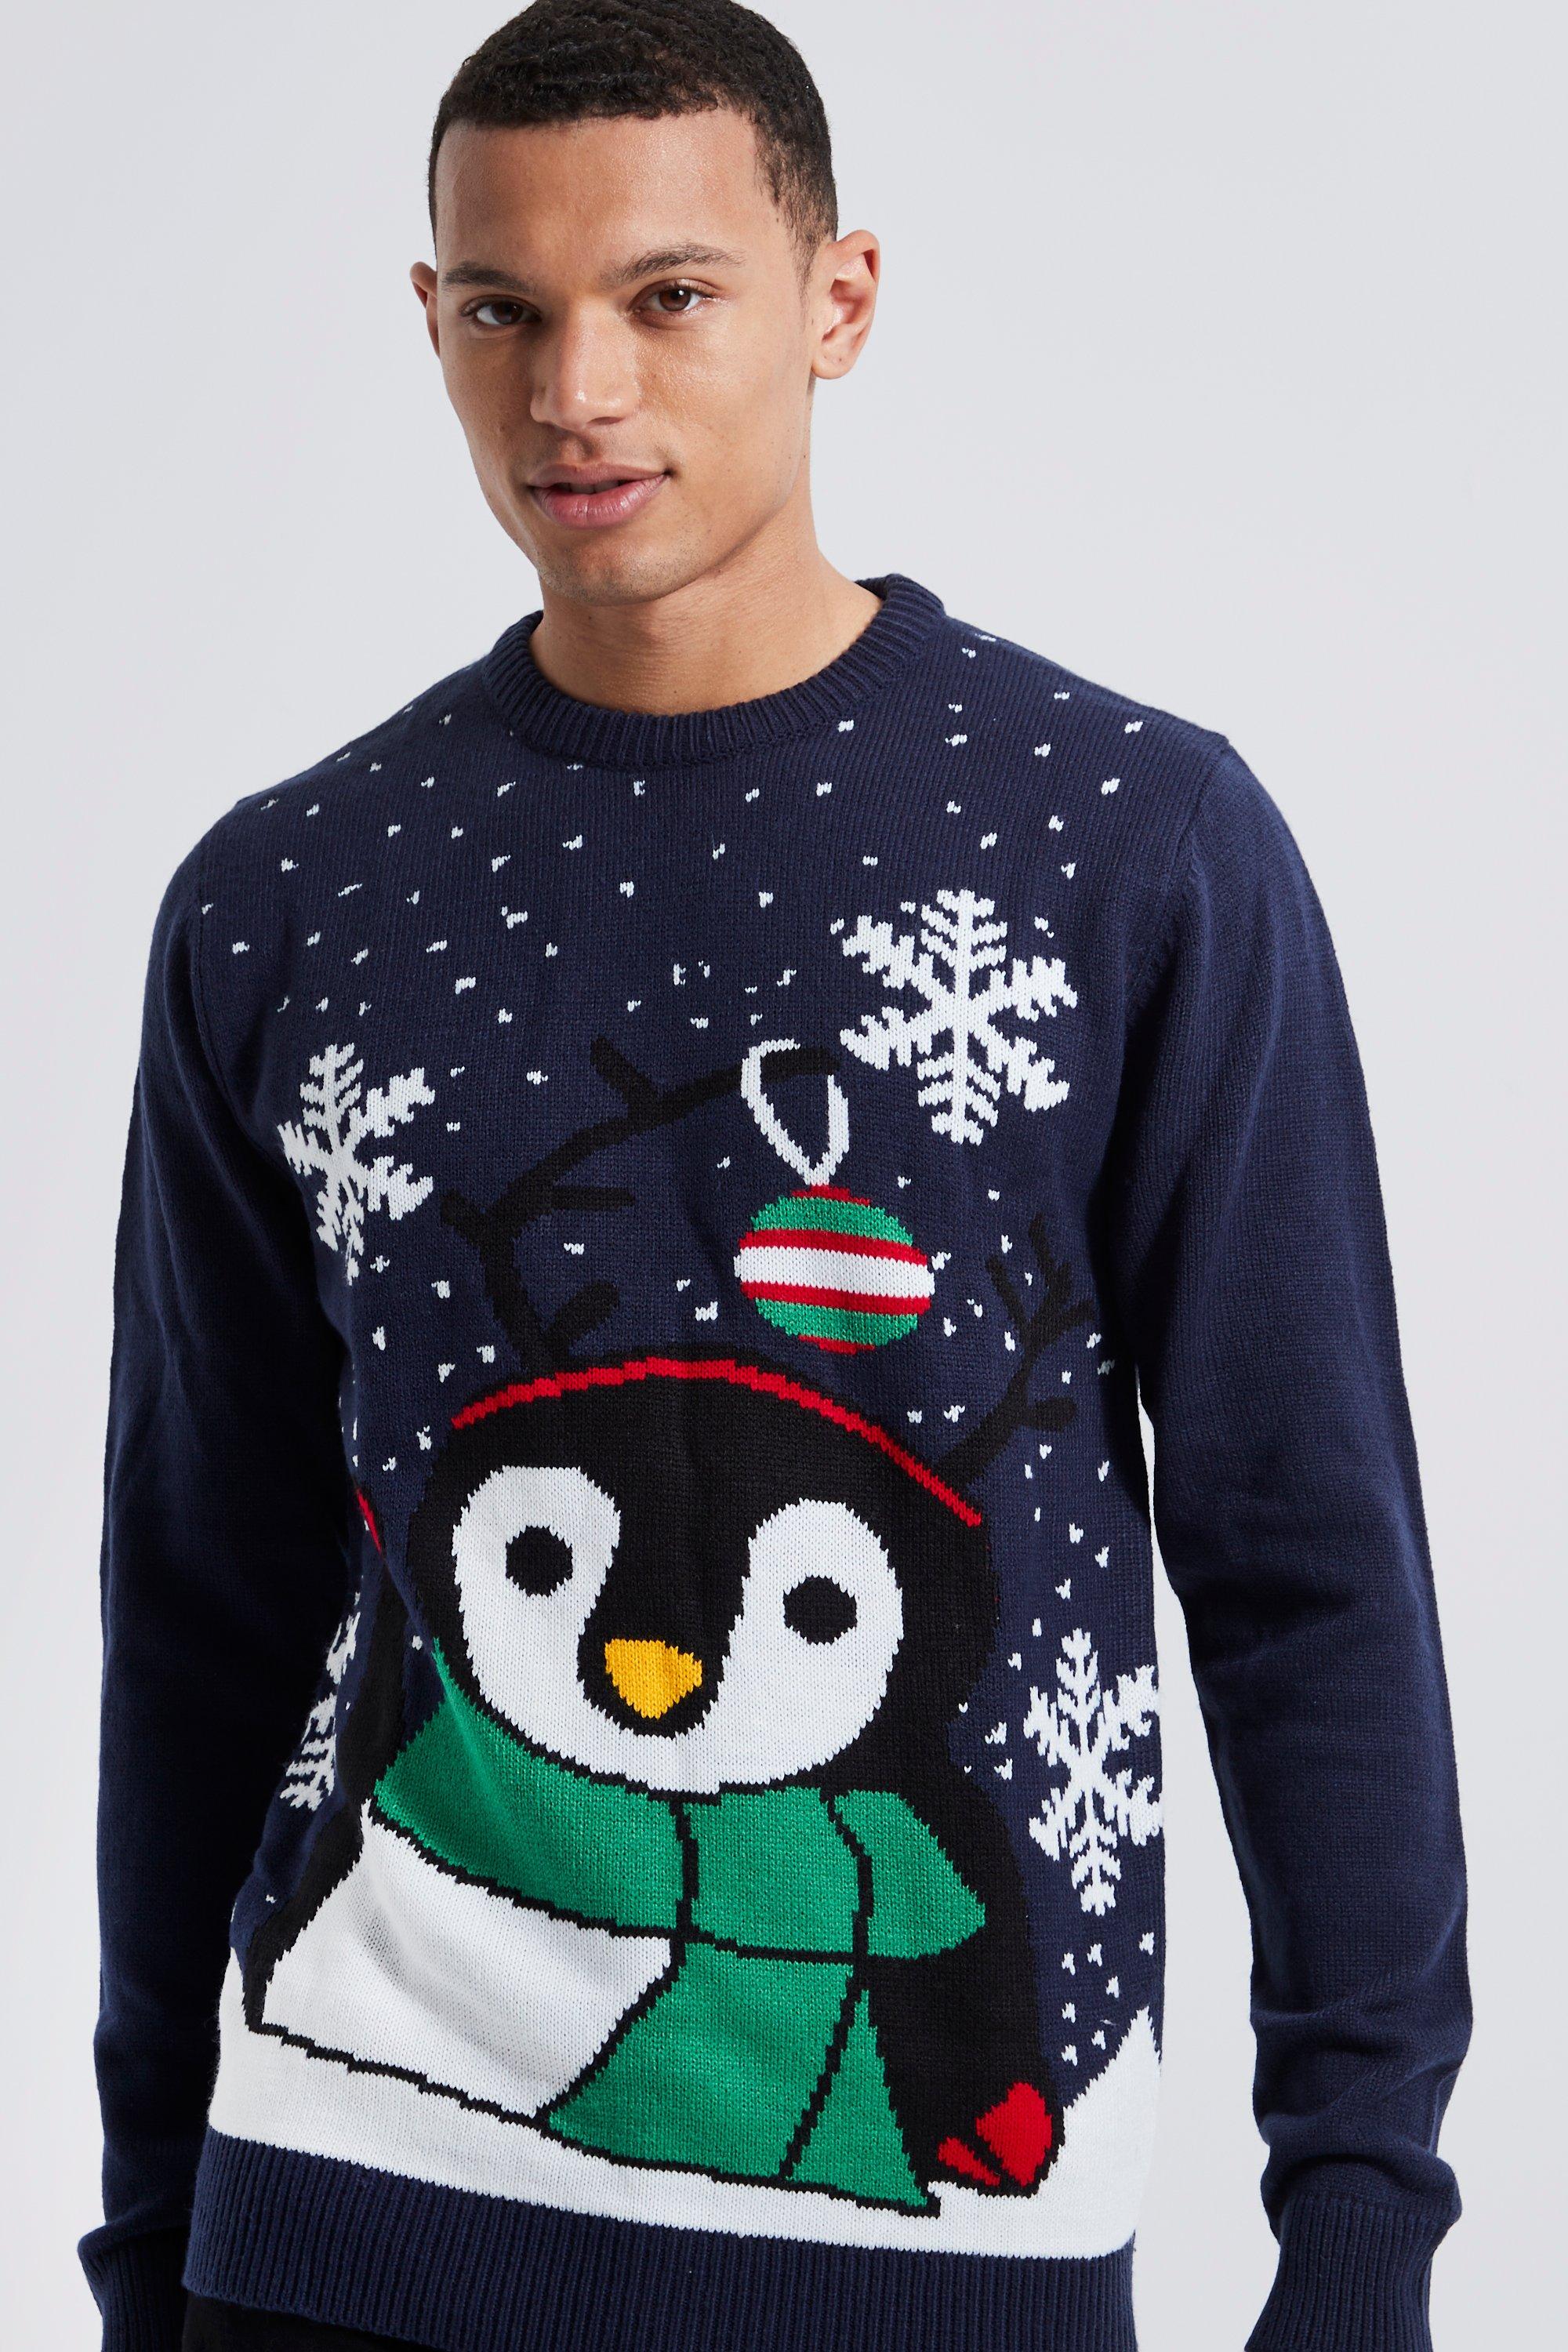 PENGUINS CHRISTMAS SWEATERS THROUGH THE YEARS